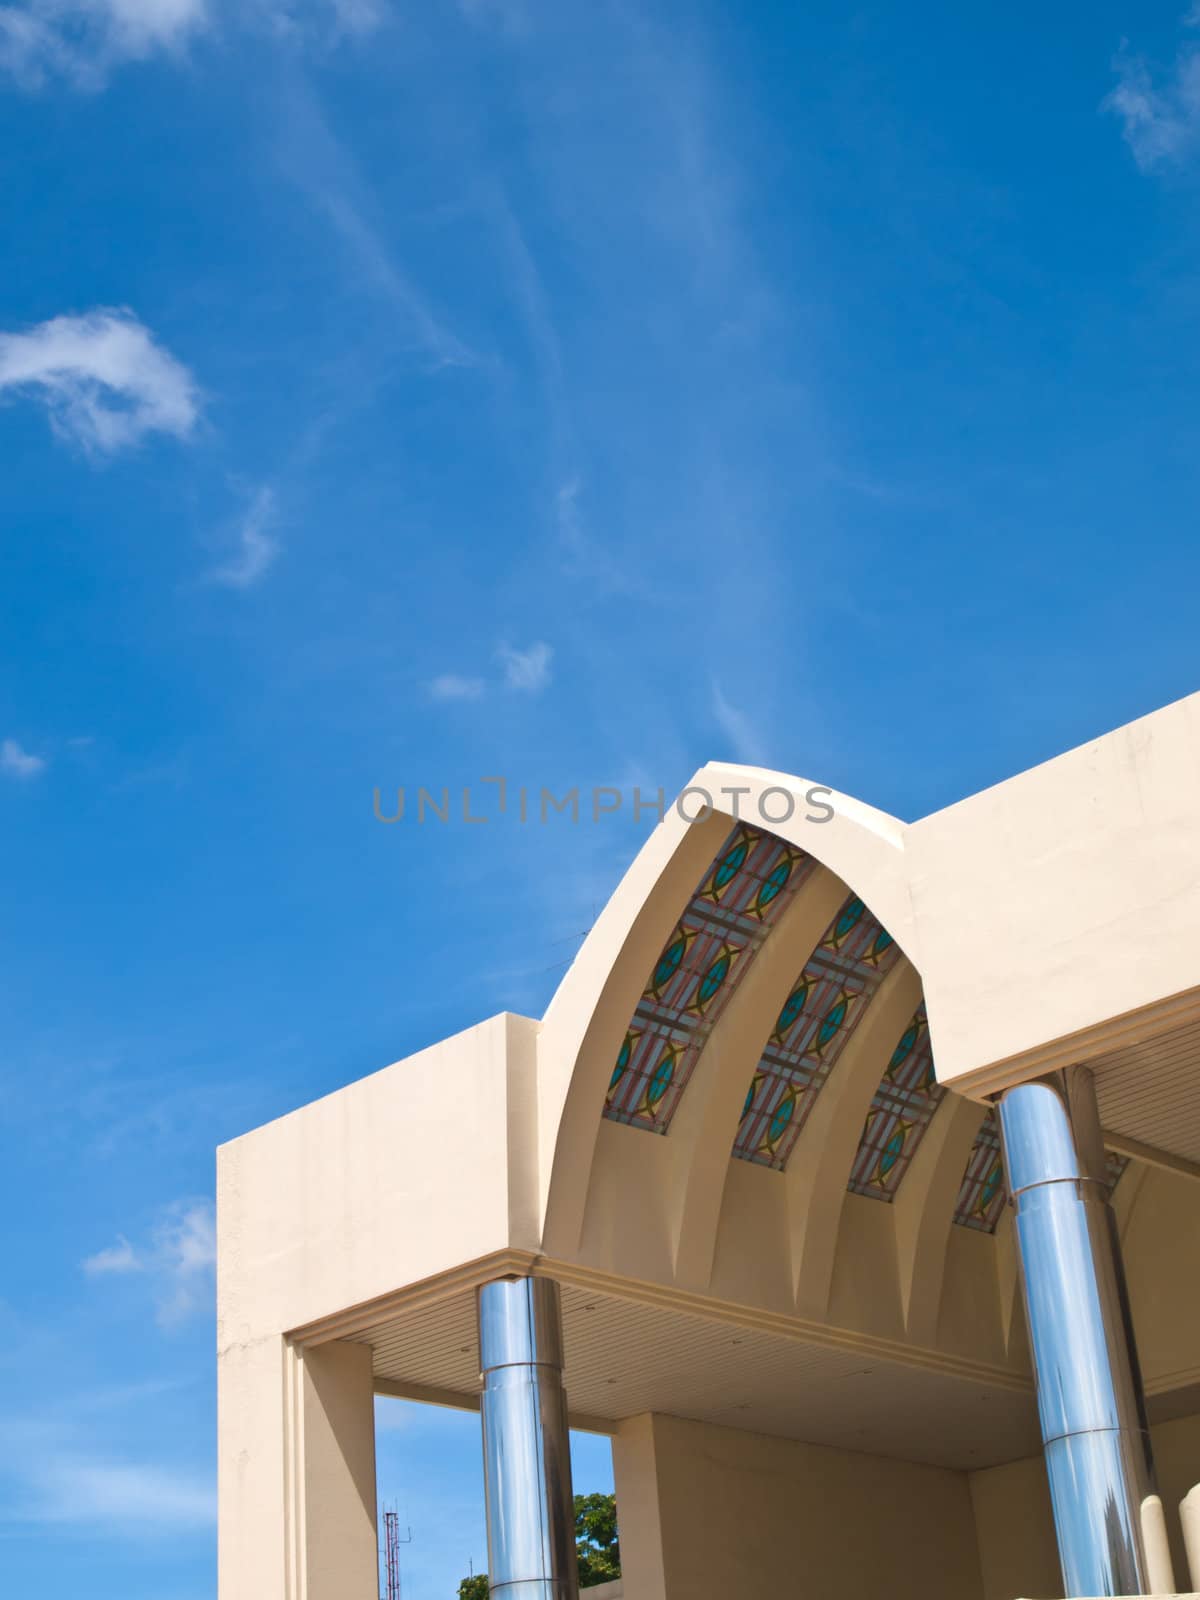 Pointed arch entrance hall of office building on blue sky